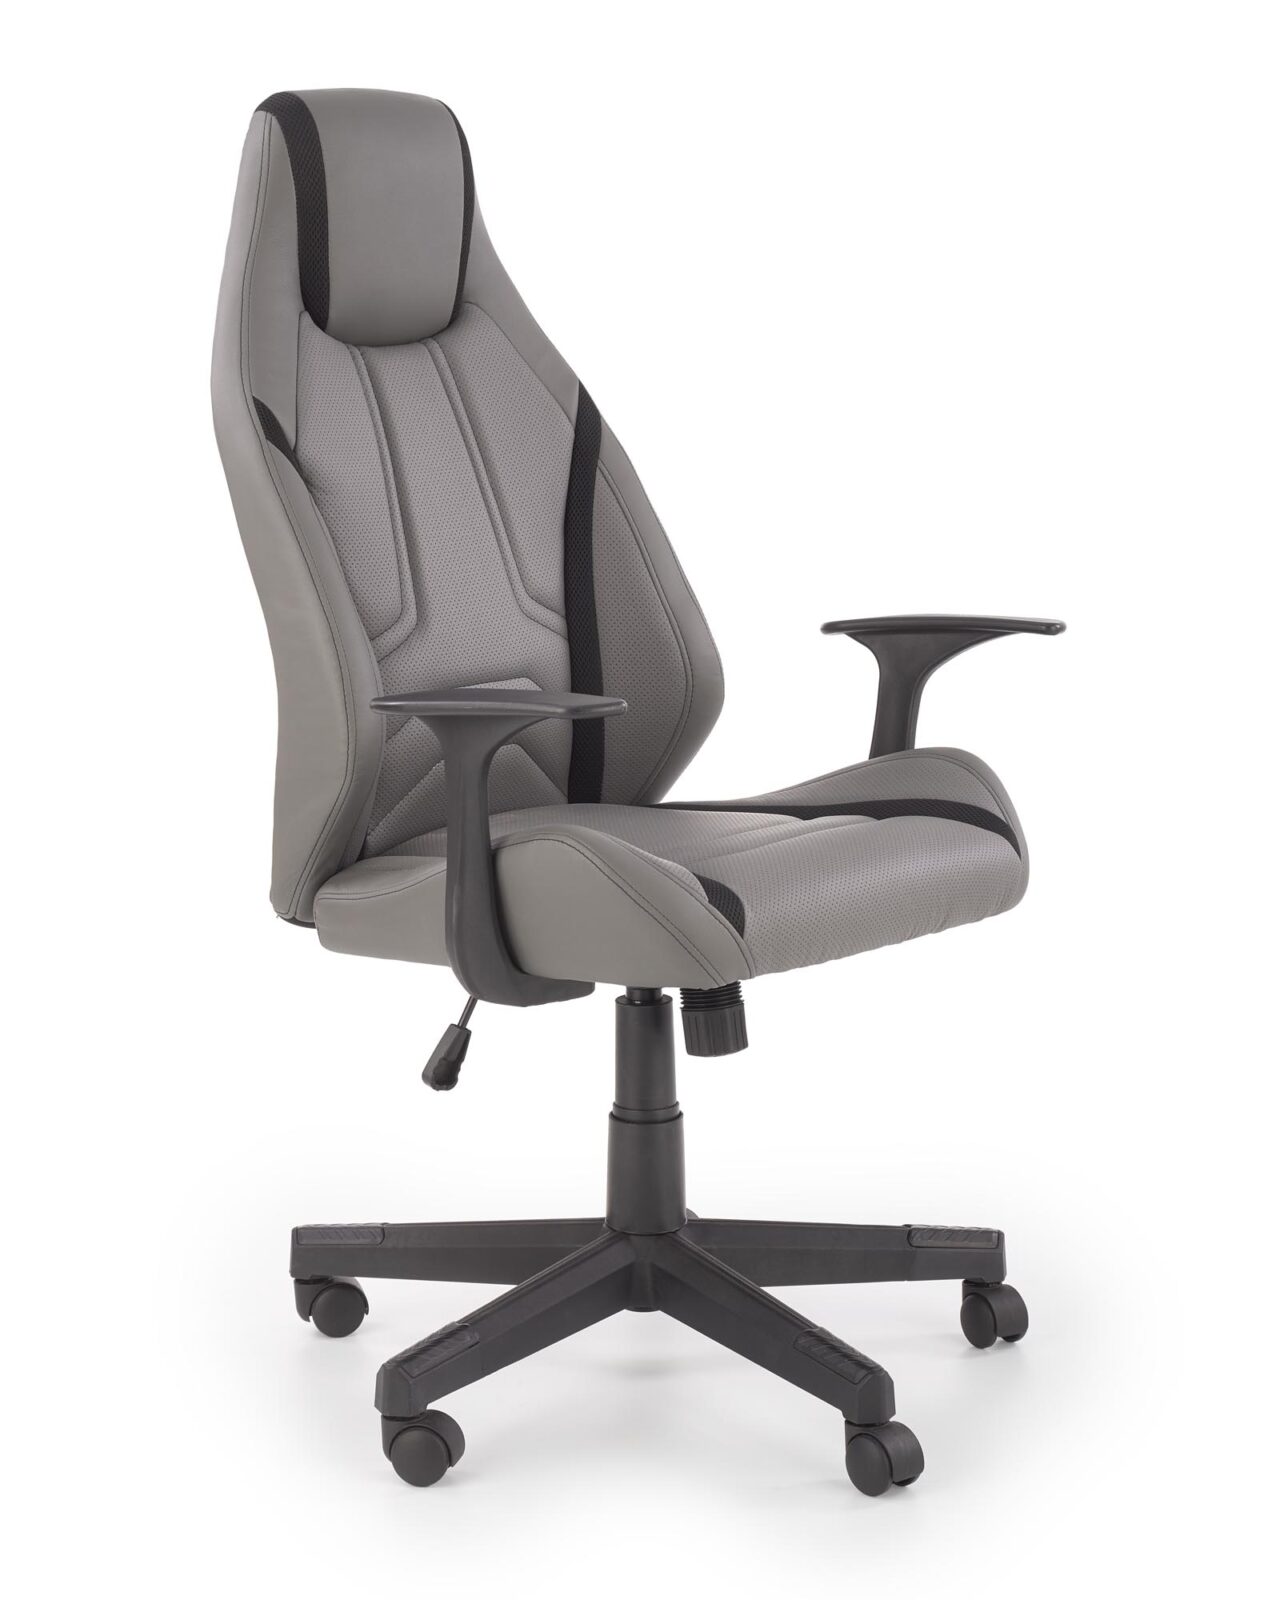 TANGER executive office chair grey/black DIOMMI V-CH-TANGER-FOT